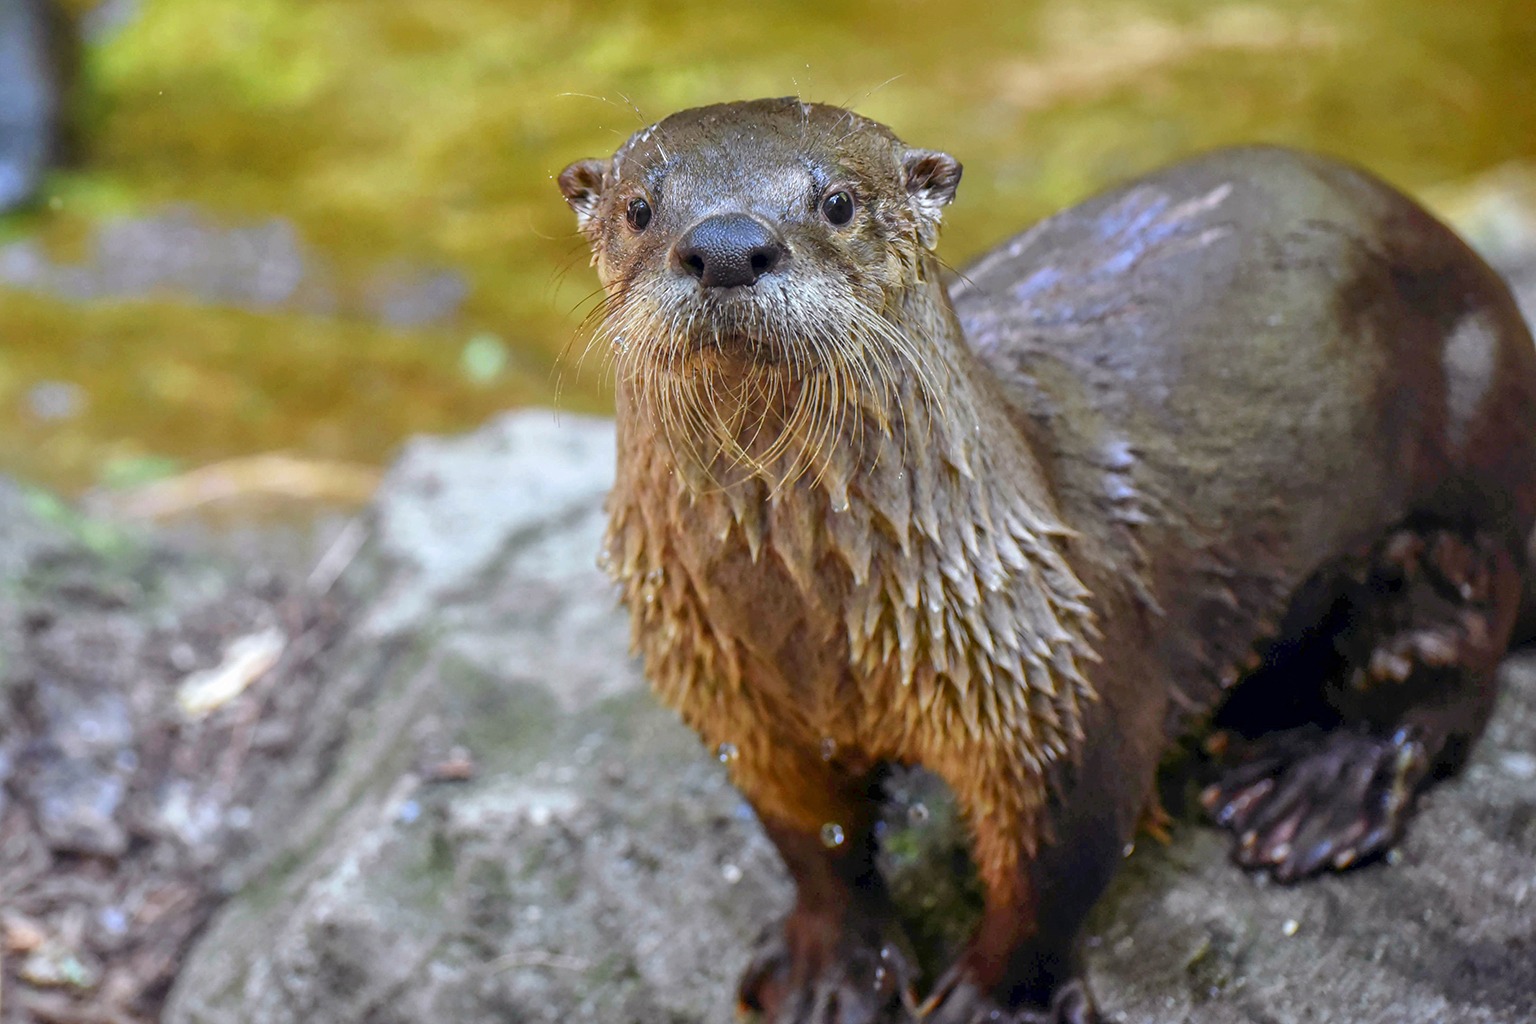 North American River Otter | The Maryland Zoo